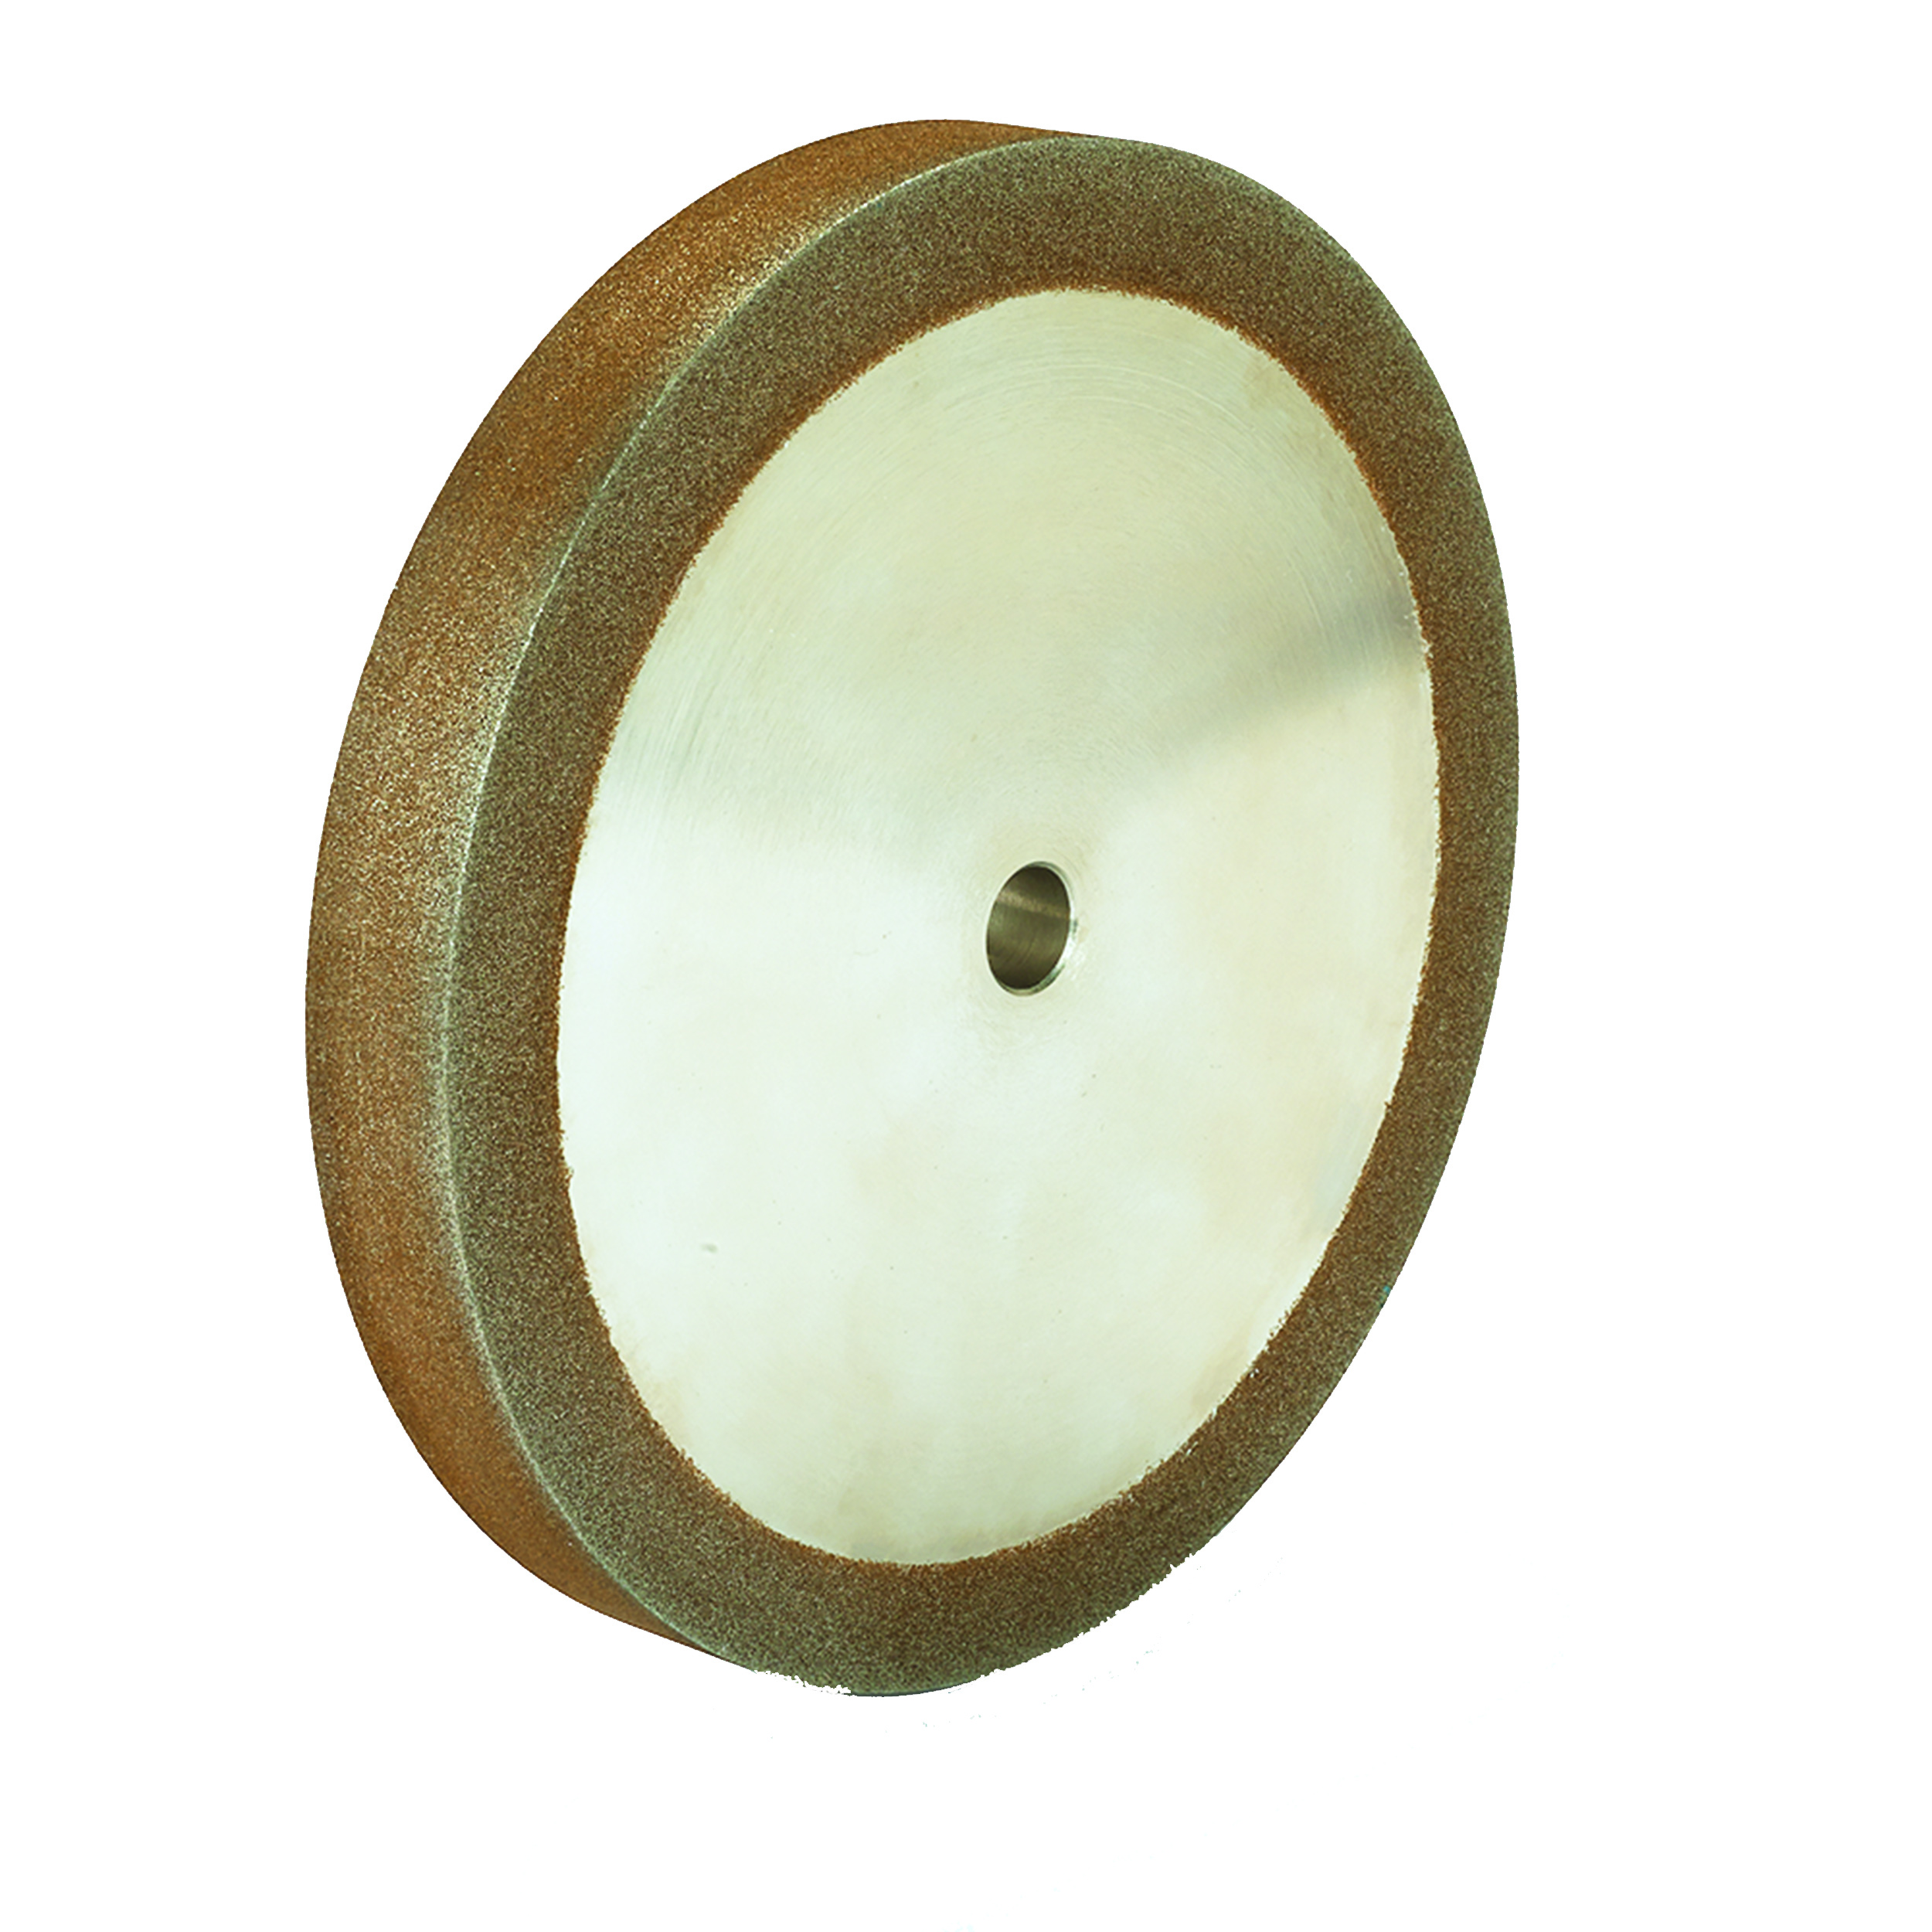 120g 8" X 1" Cbn Grinding Wheel With 5/8" Arbor